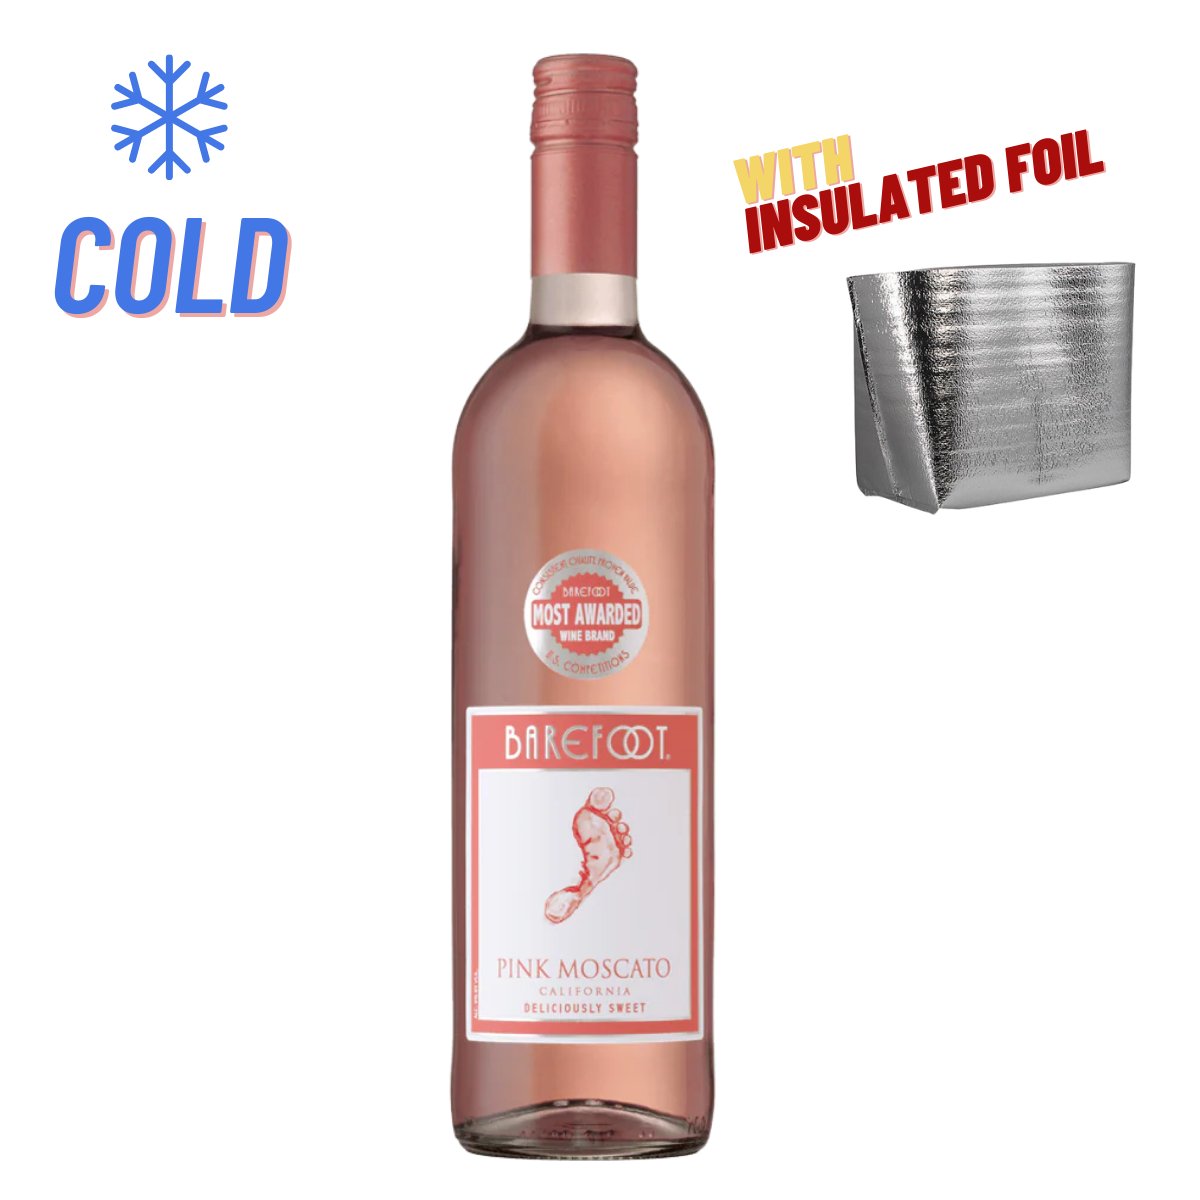 Barefoot Pink Moscato 750ml (❄️COLD) - Happy Hour